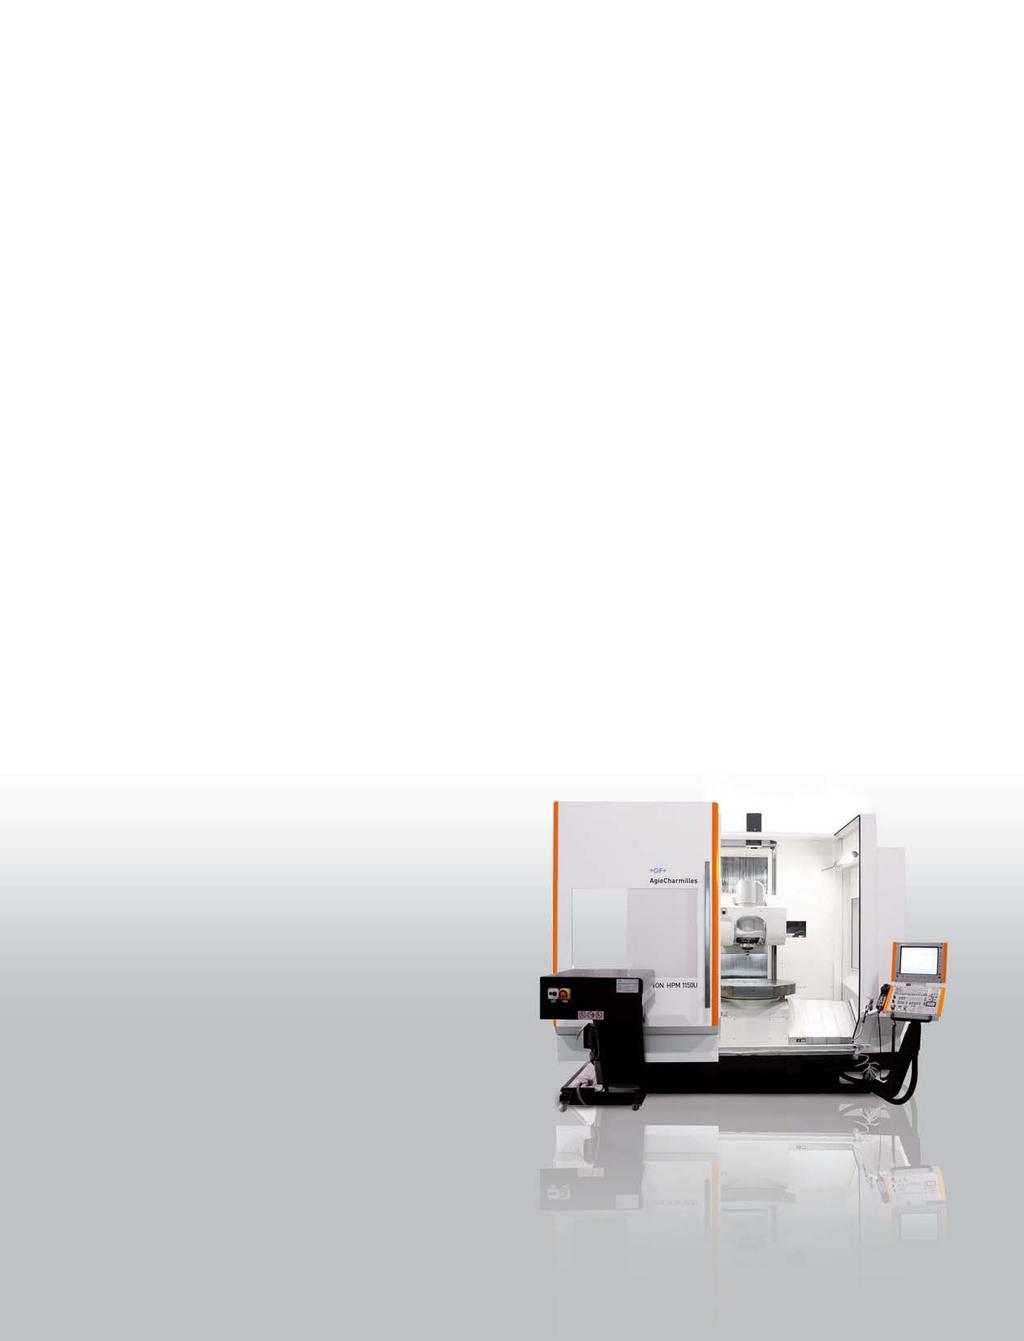 High performance milling versus high speed milling - the one cannot replace the other!